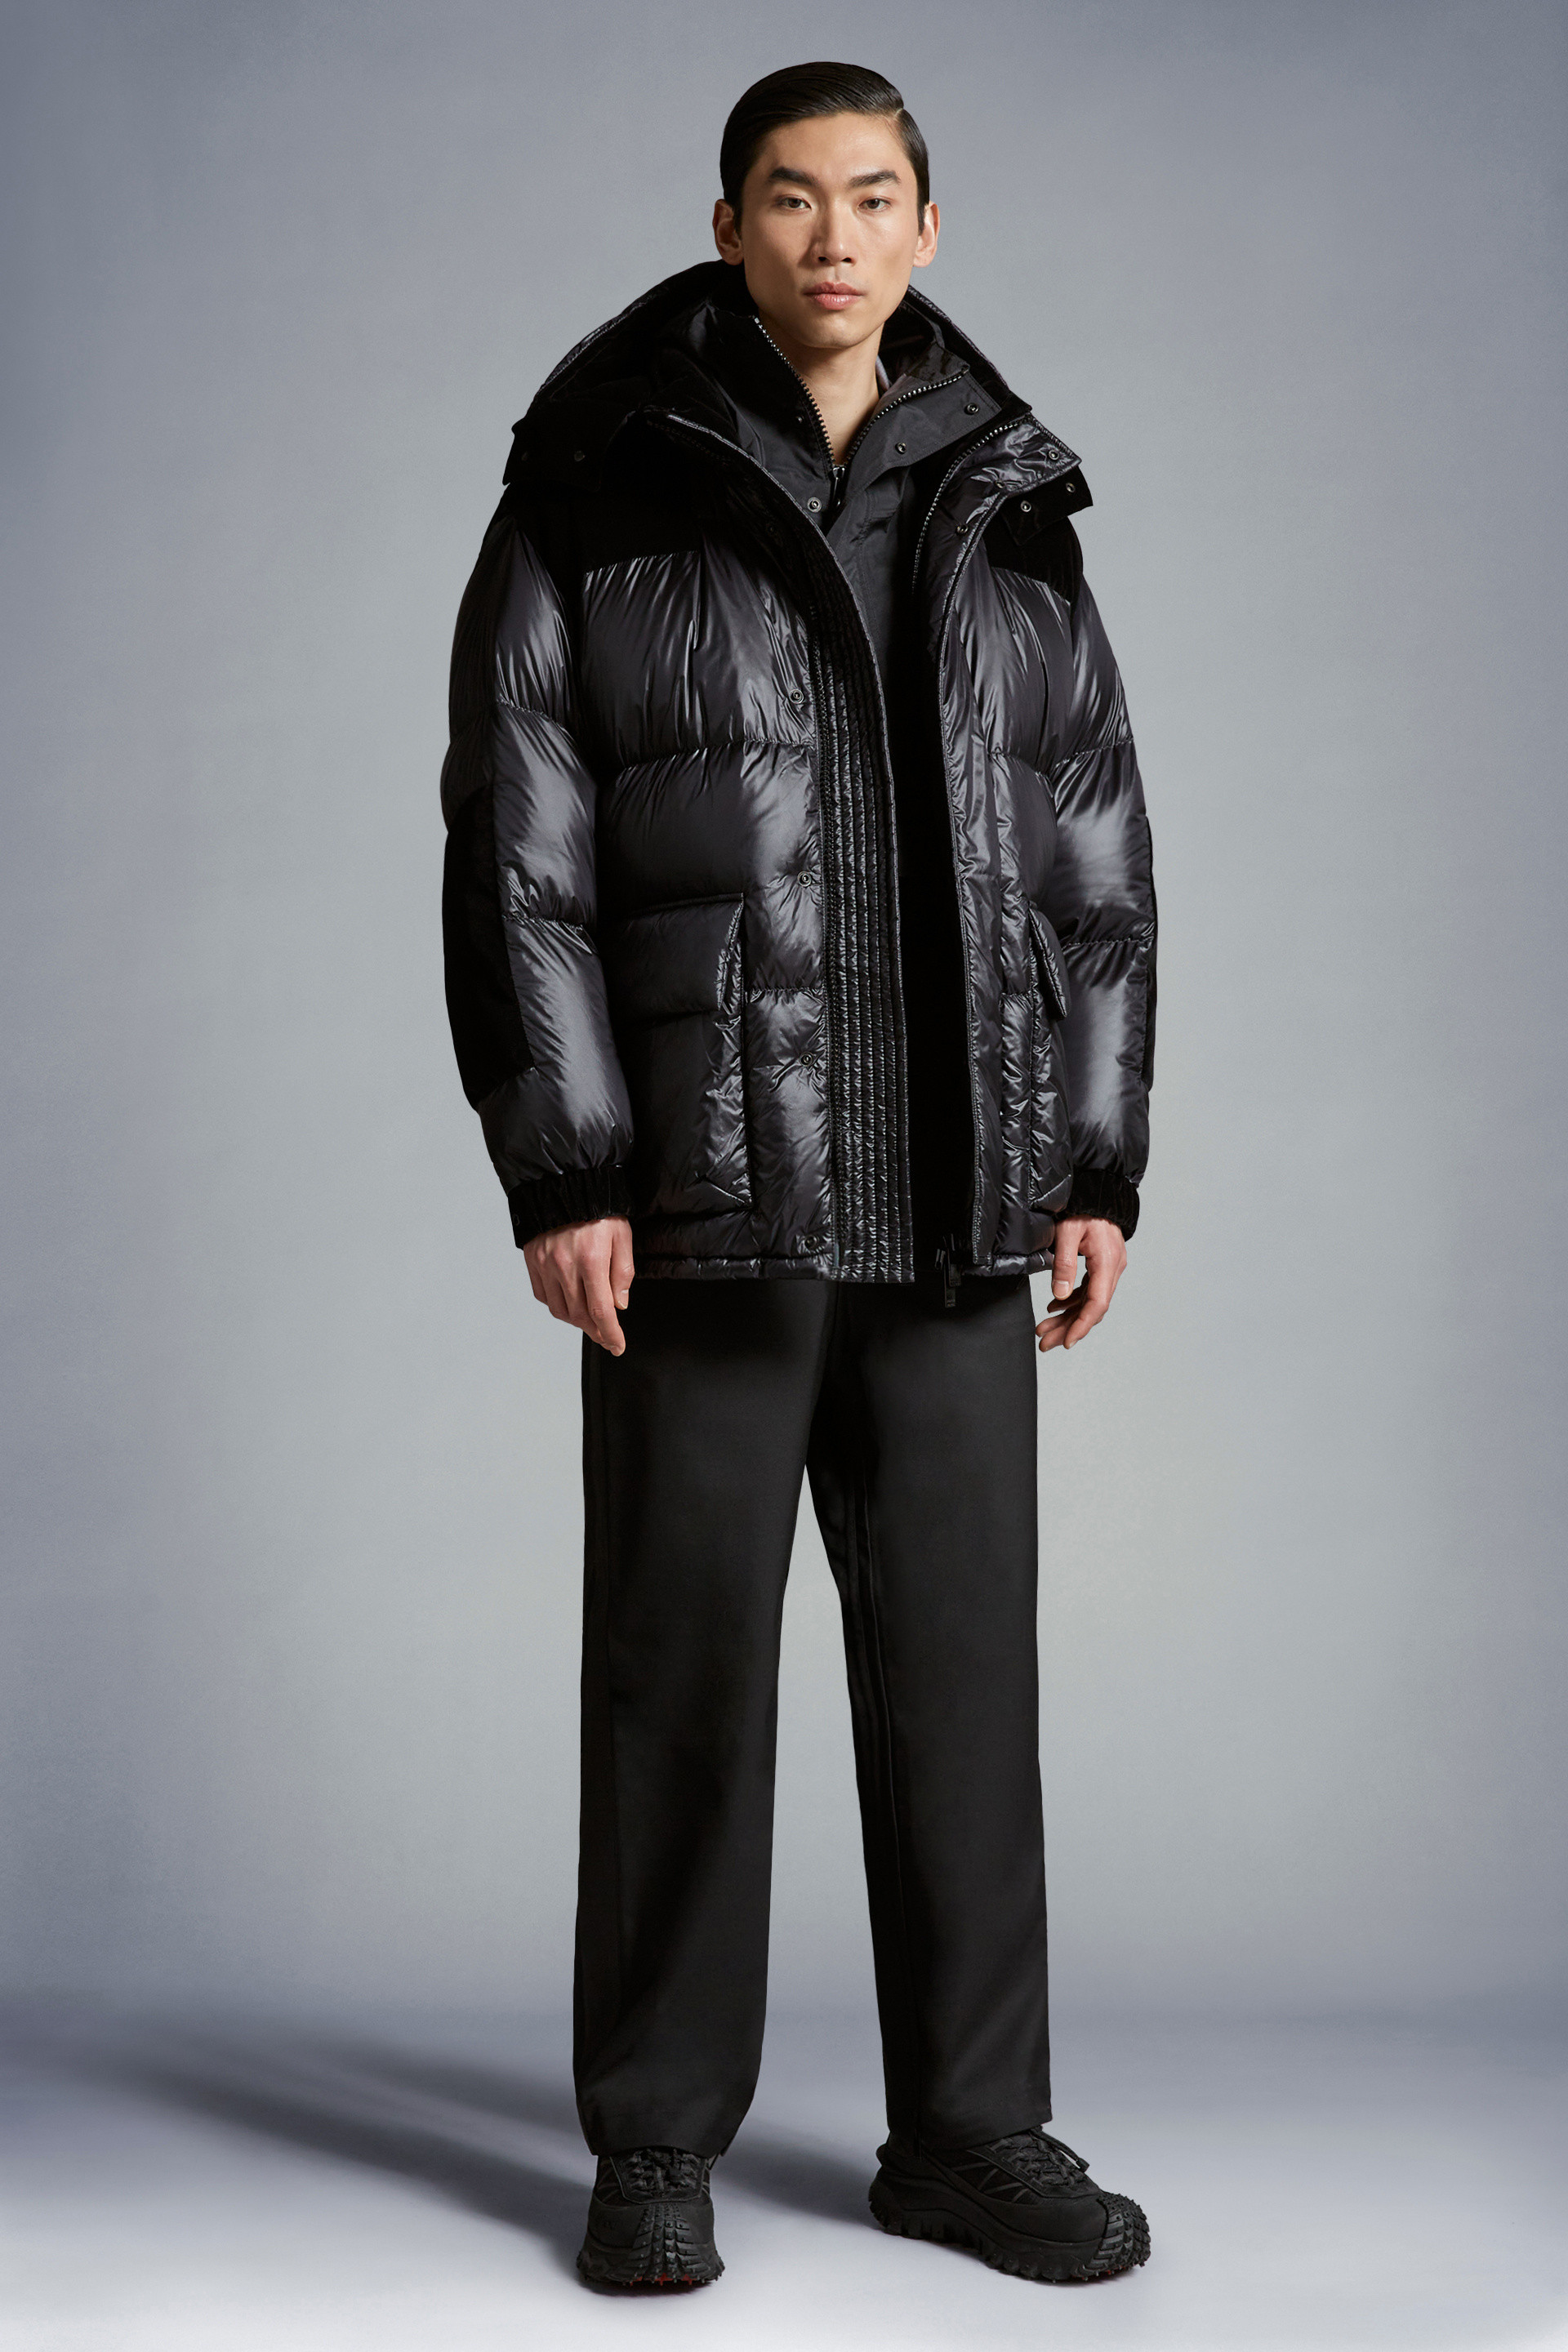 For Special Projects - Moncler x Sacai | Moncler US